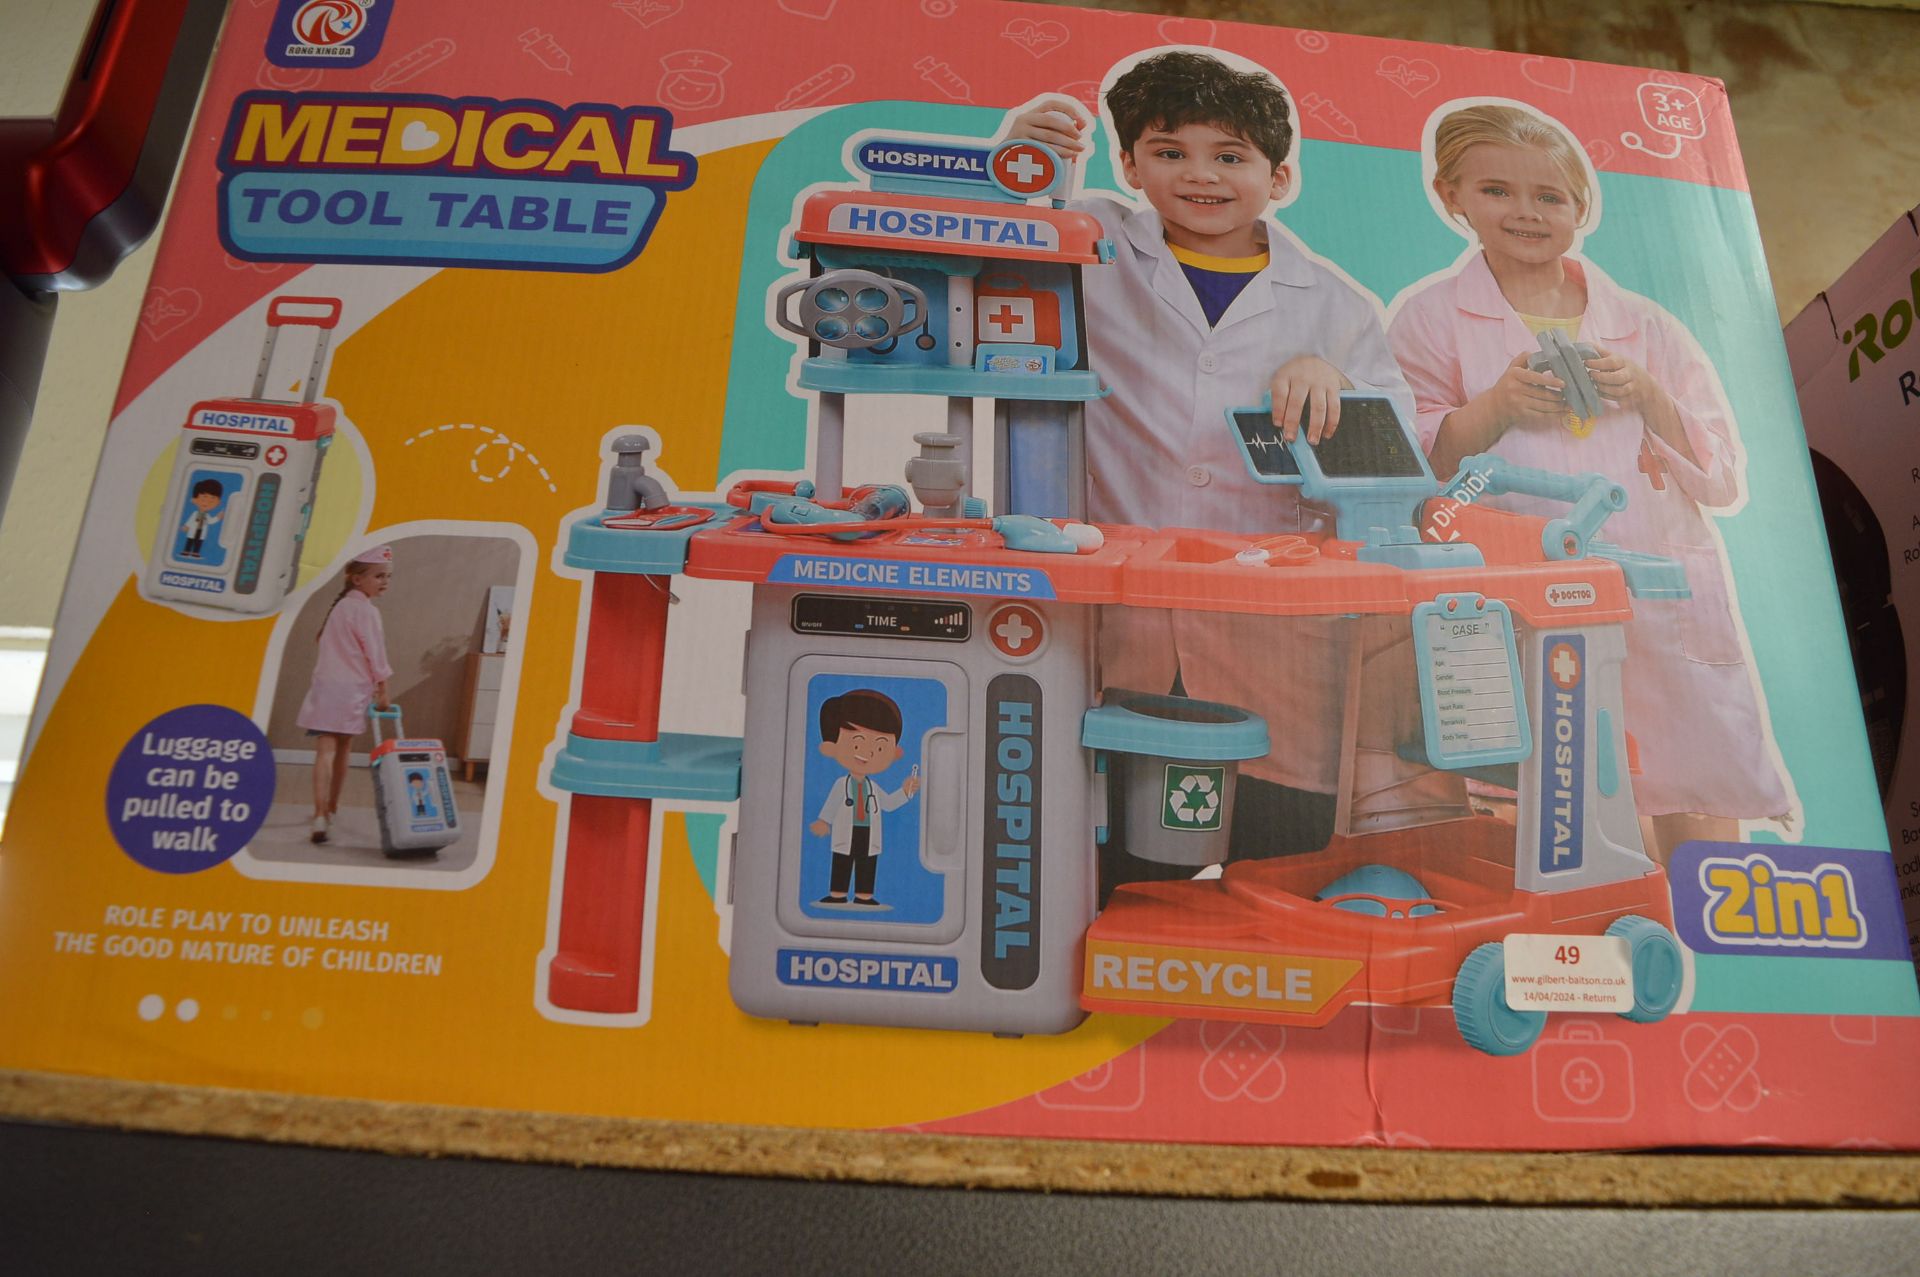 *2-in-1 Kid’s Medical Tool Table